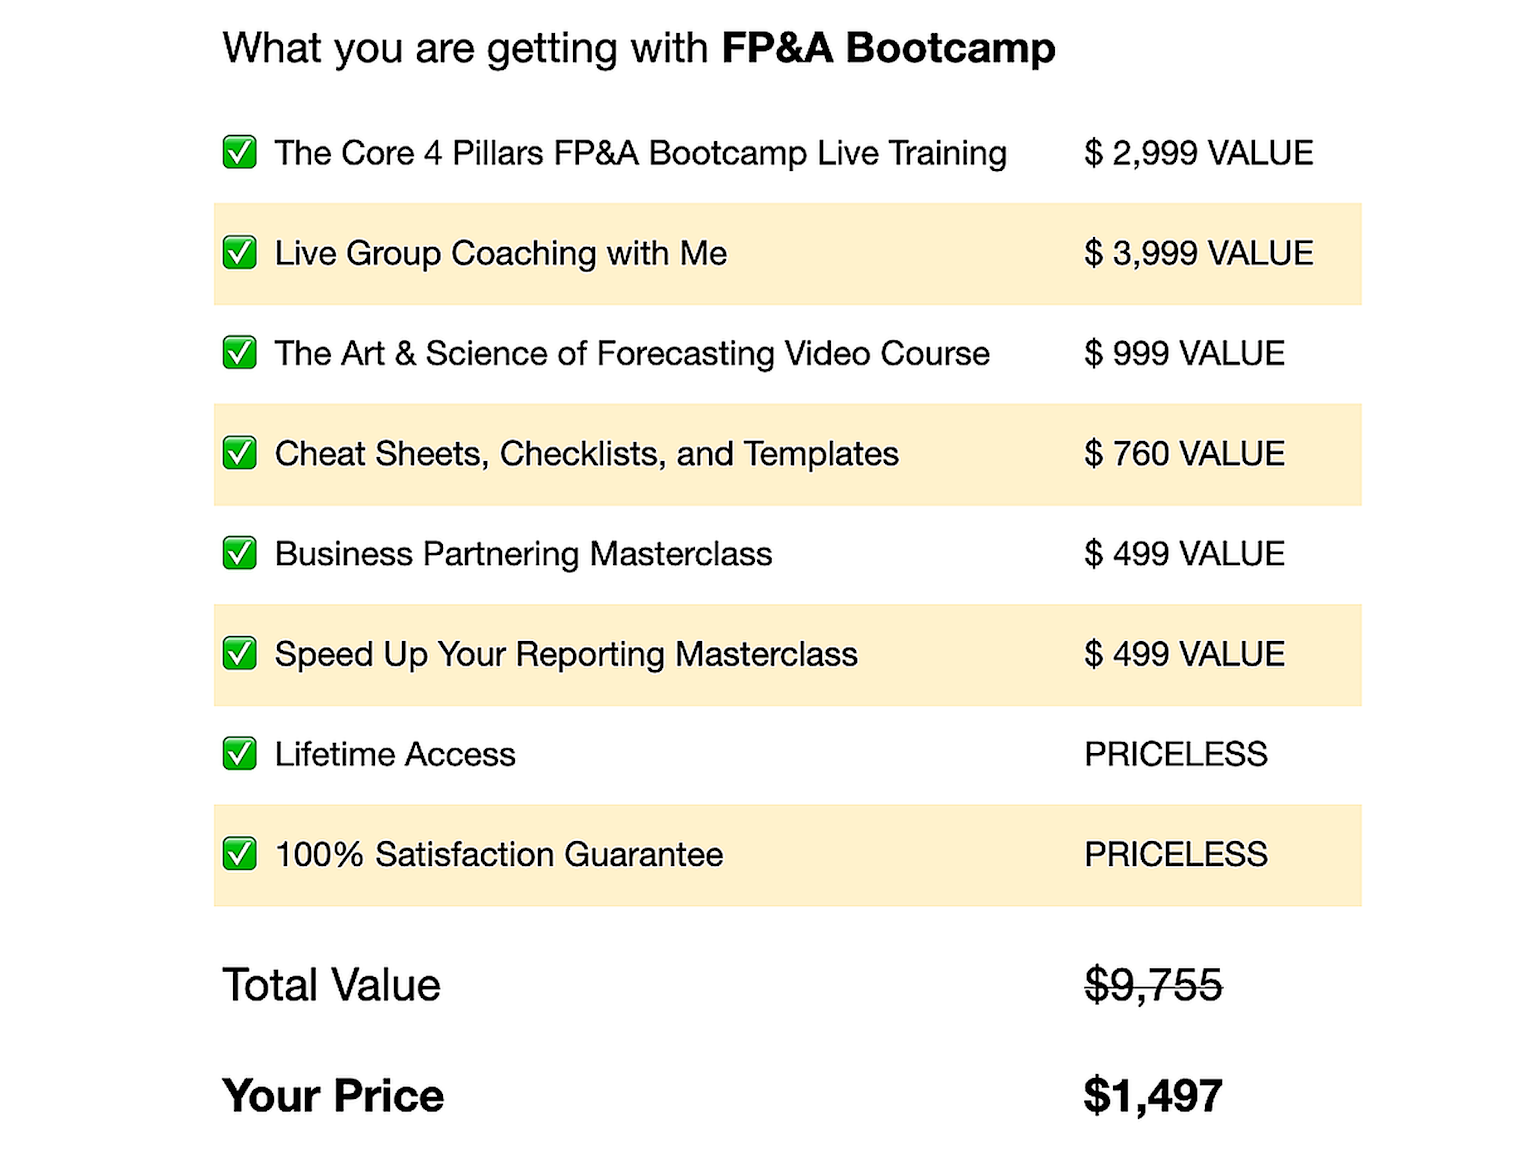 What you are getting with FP&A Bootcamp